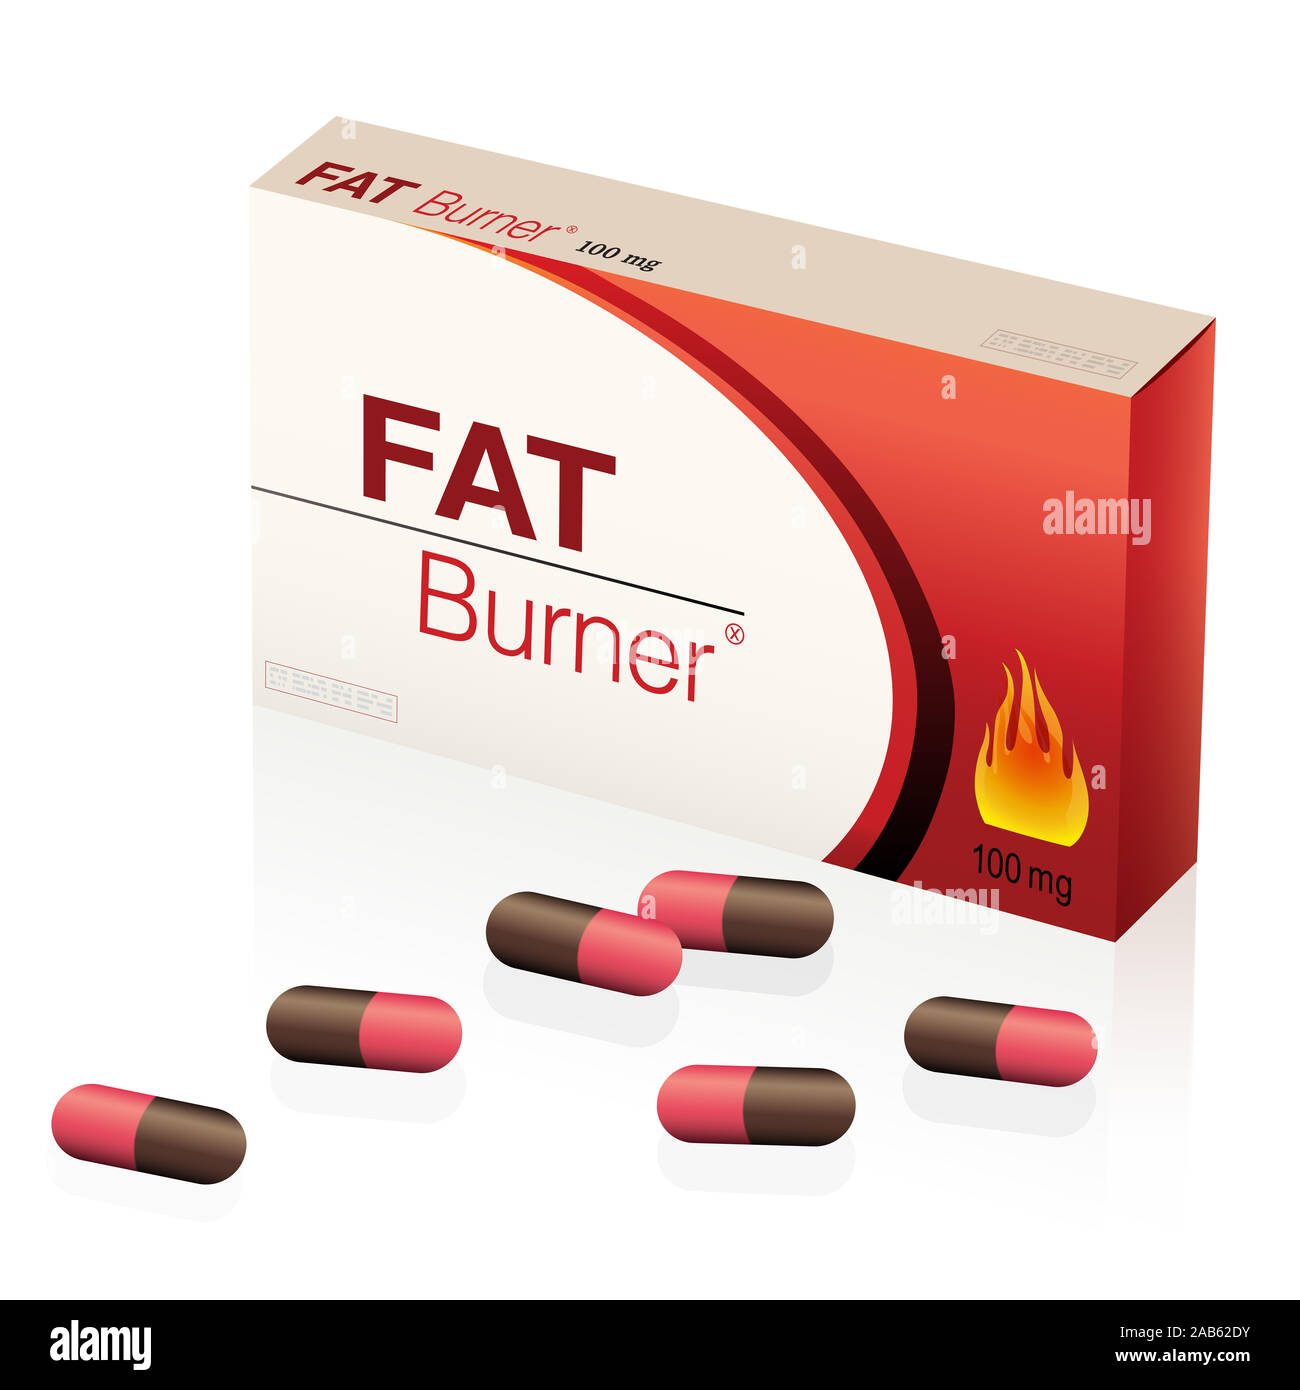 Fat burner pills, packet of capsules for pharmaceutical treatment to lose weight, a medical fake product - illustration on white background. Stock Photo